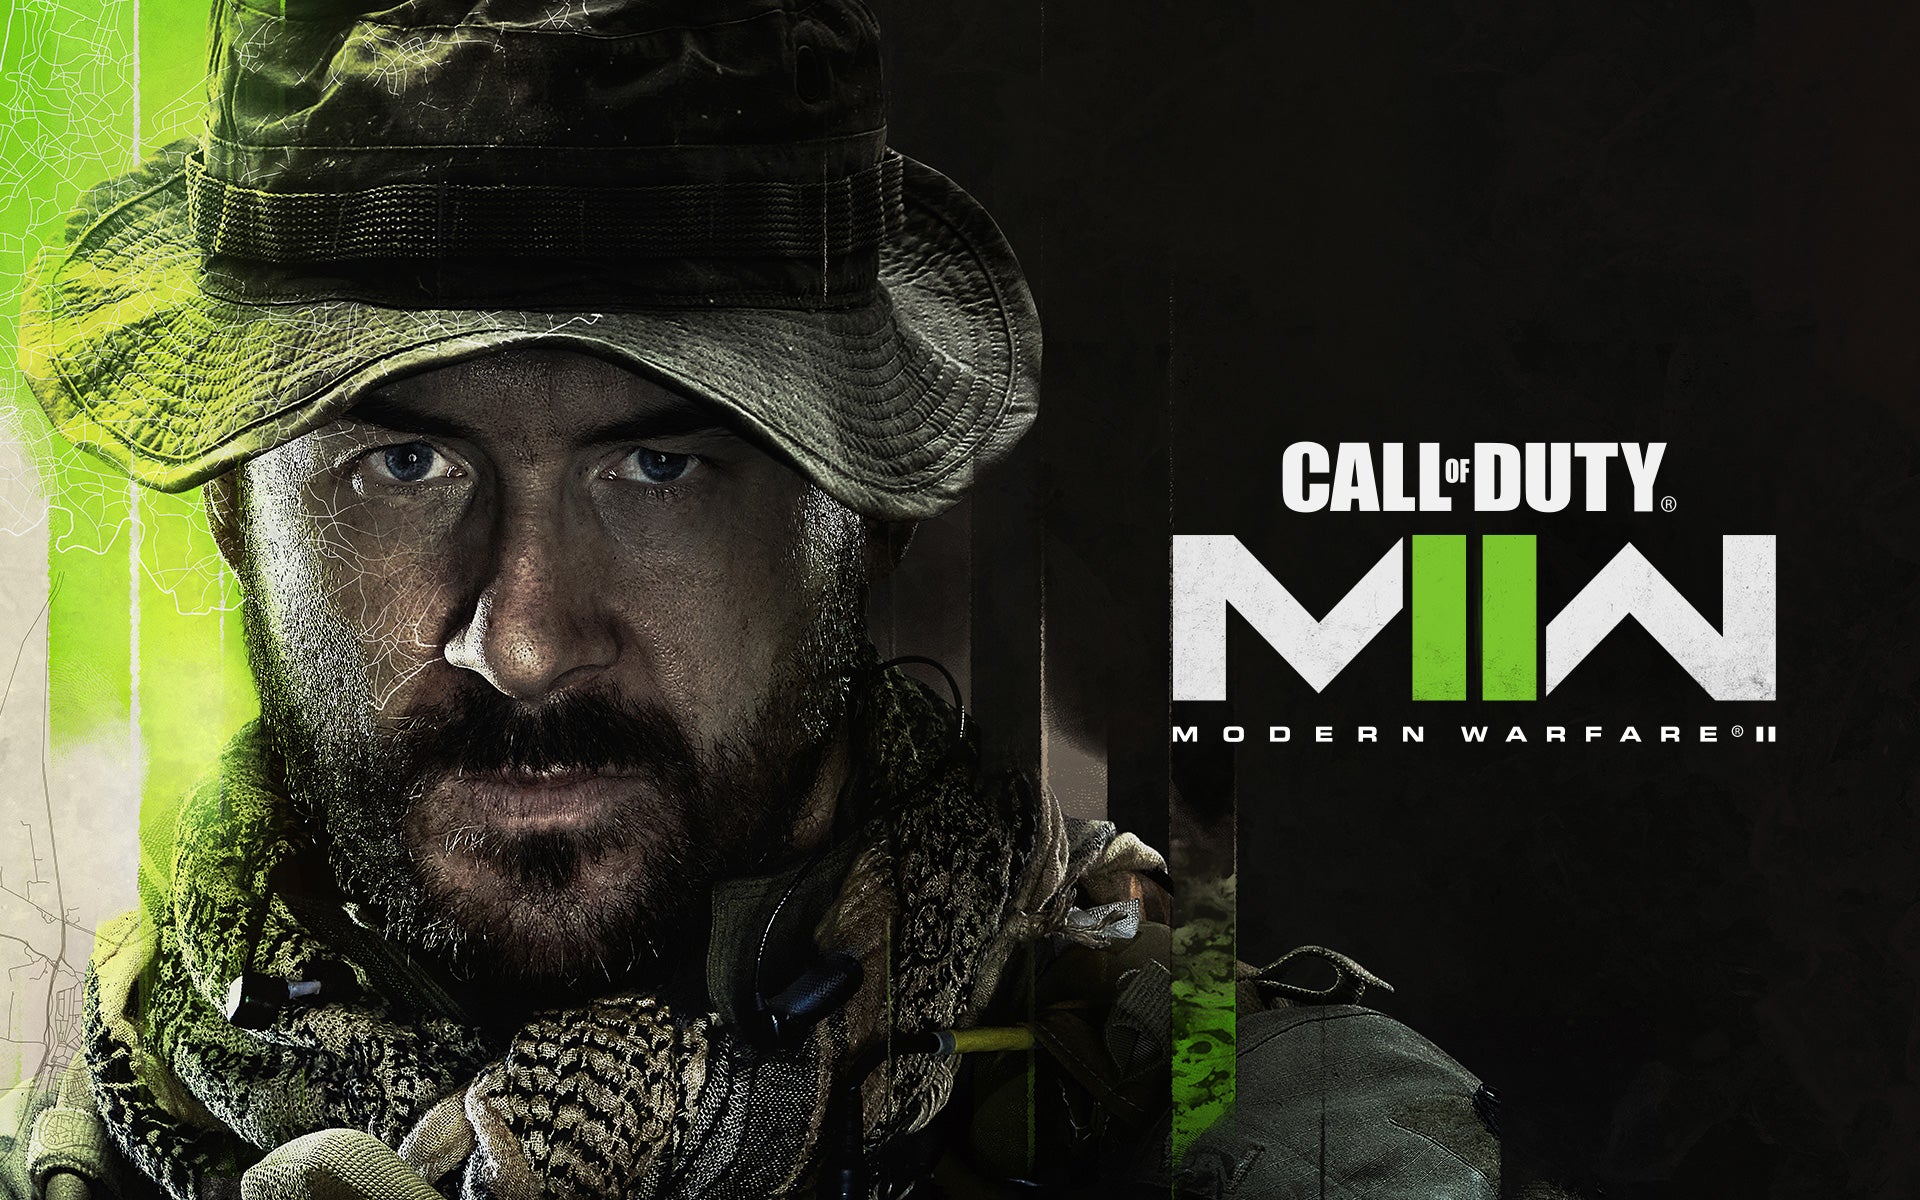 Image for Call of Duty: Modern Warfare 2 beta info, editions, and pre-order bonuses leaked by dataminers